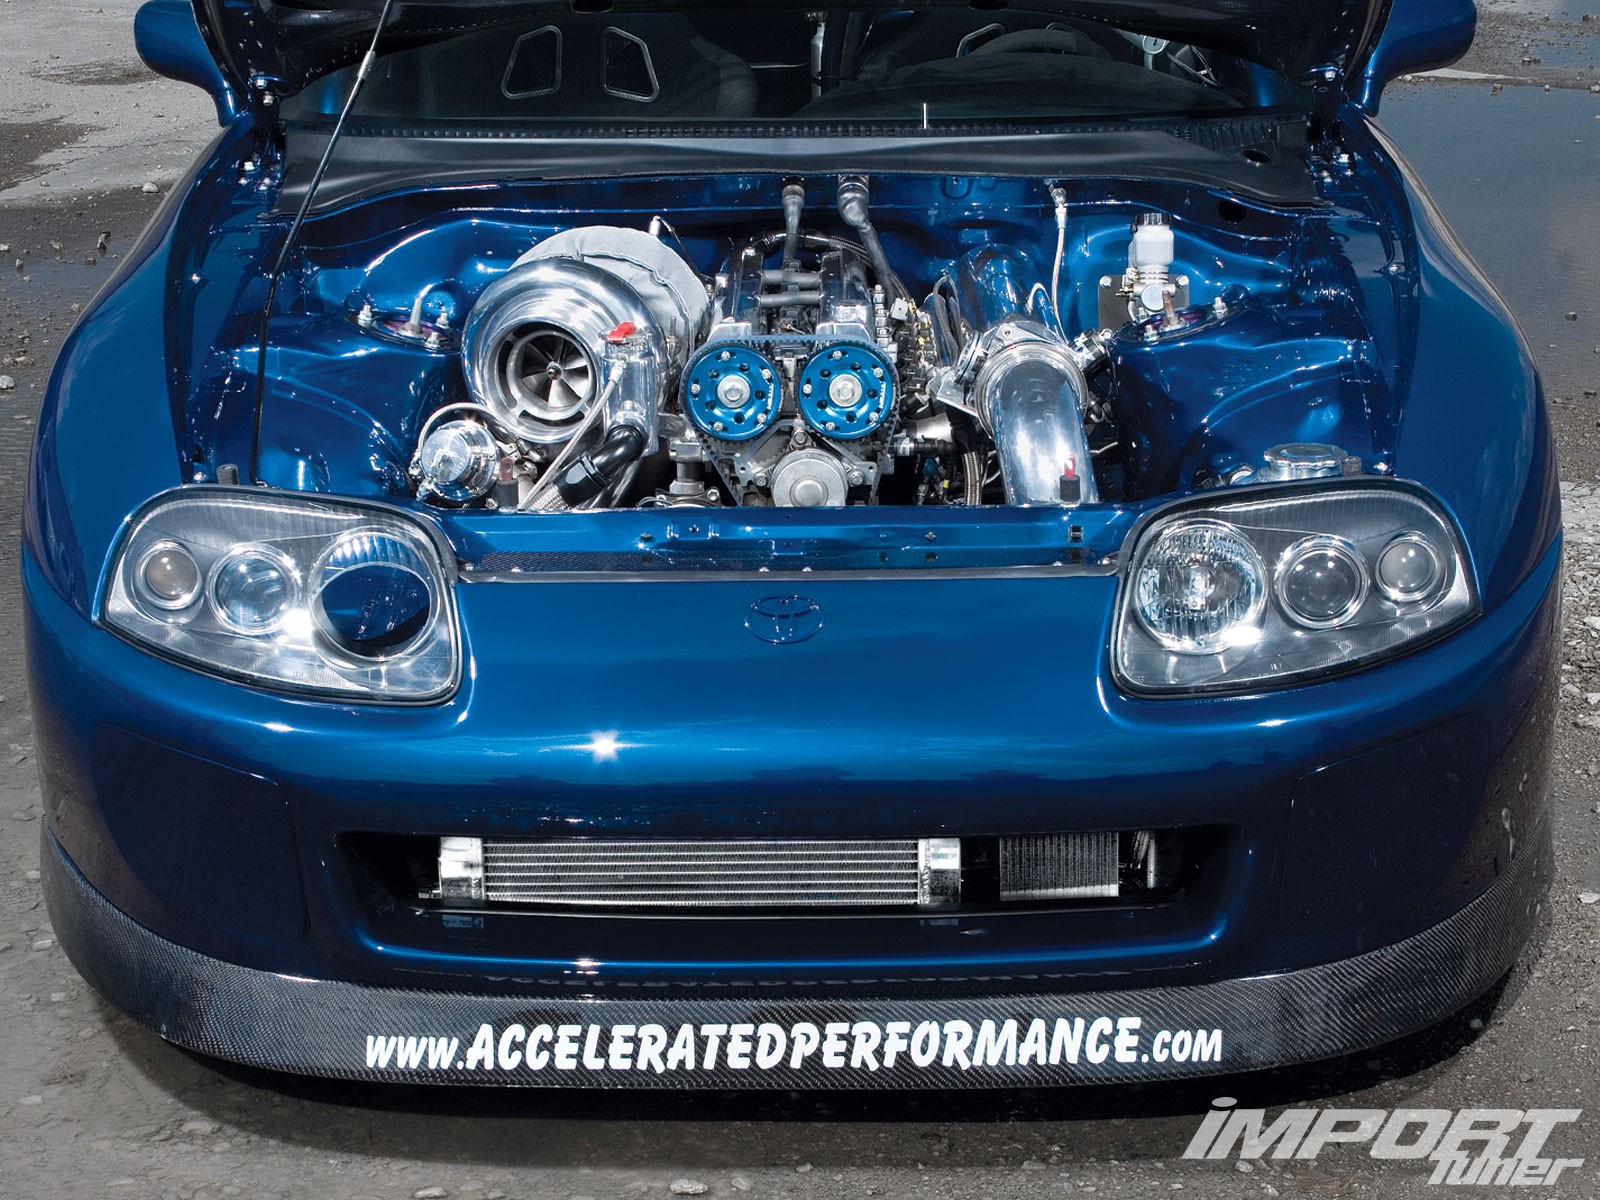 General 1600x1200 Toyota Supra Toyota car blue cars engine frontal view vehicle